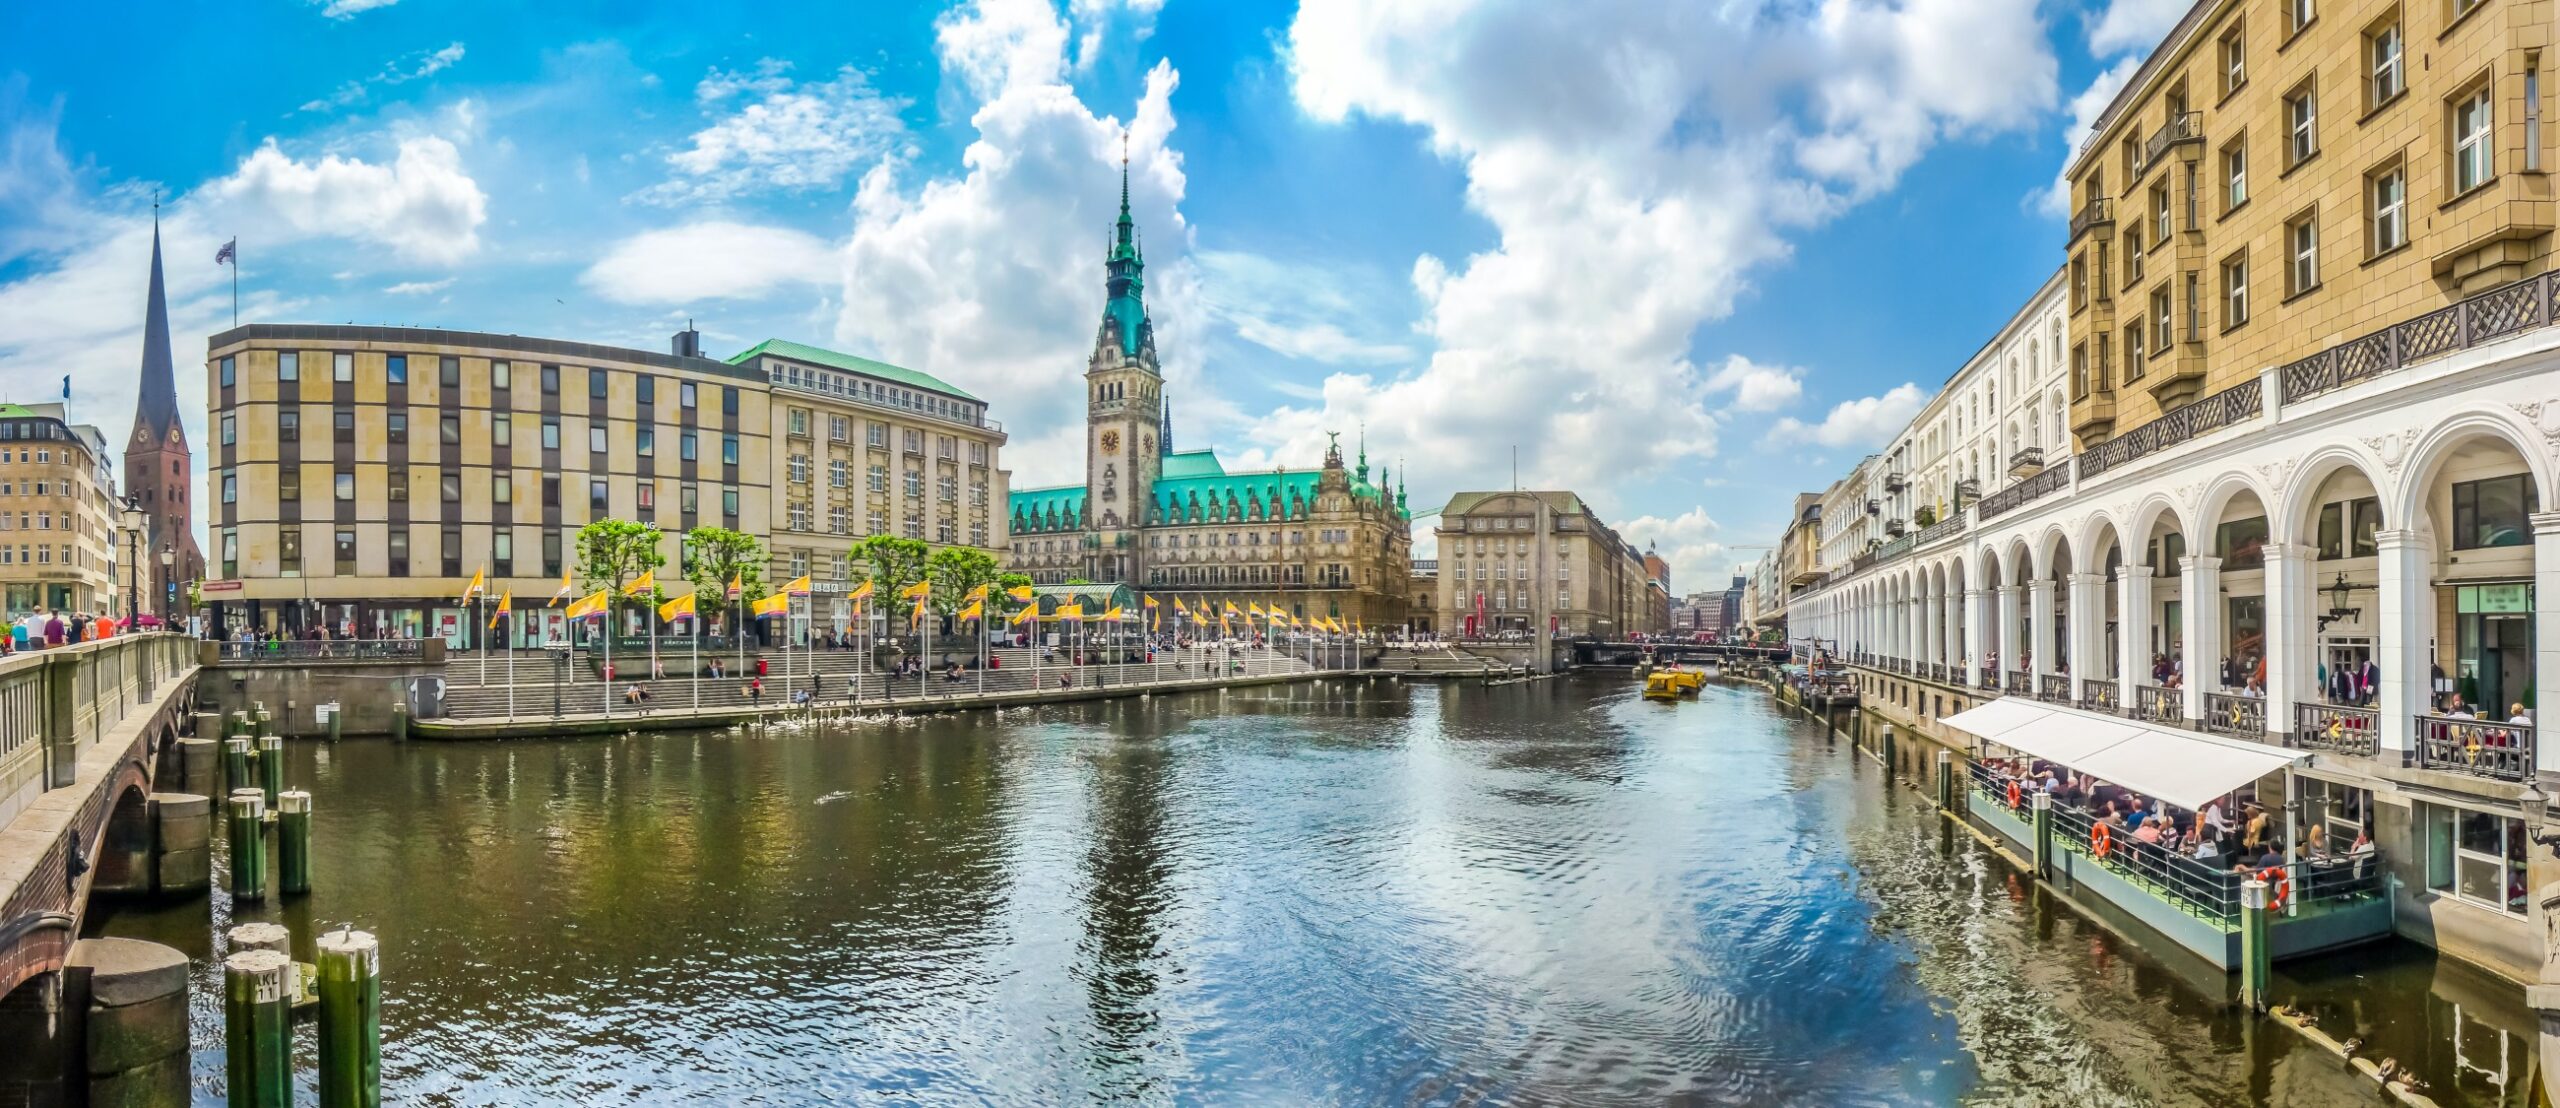 Hamburg – The Maritime City That’s Making Waves: Best Things to Do